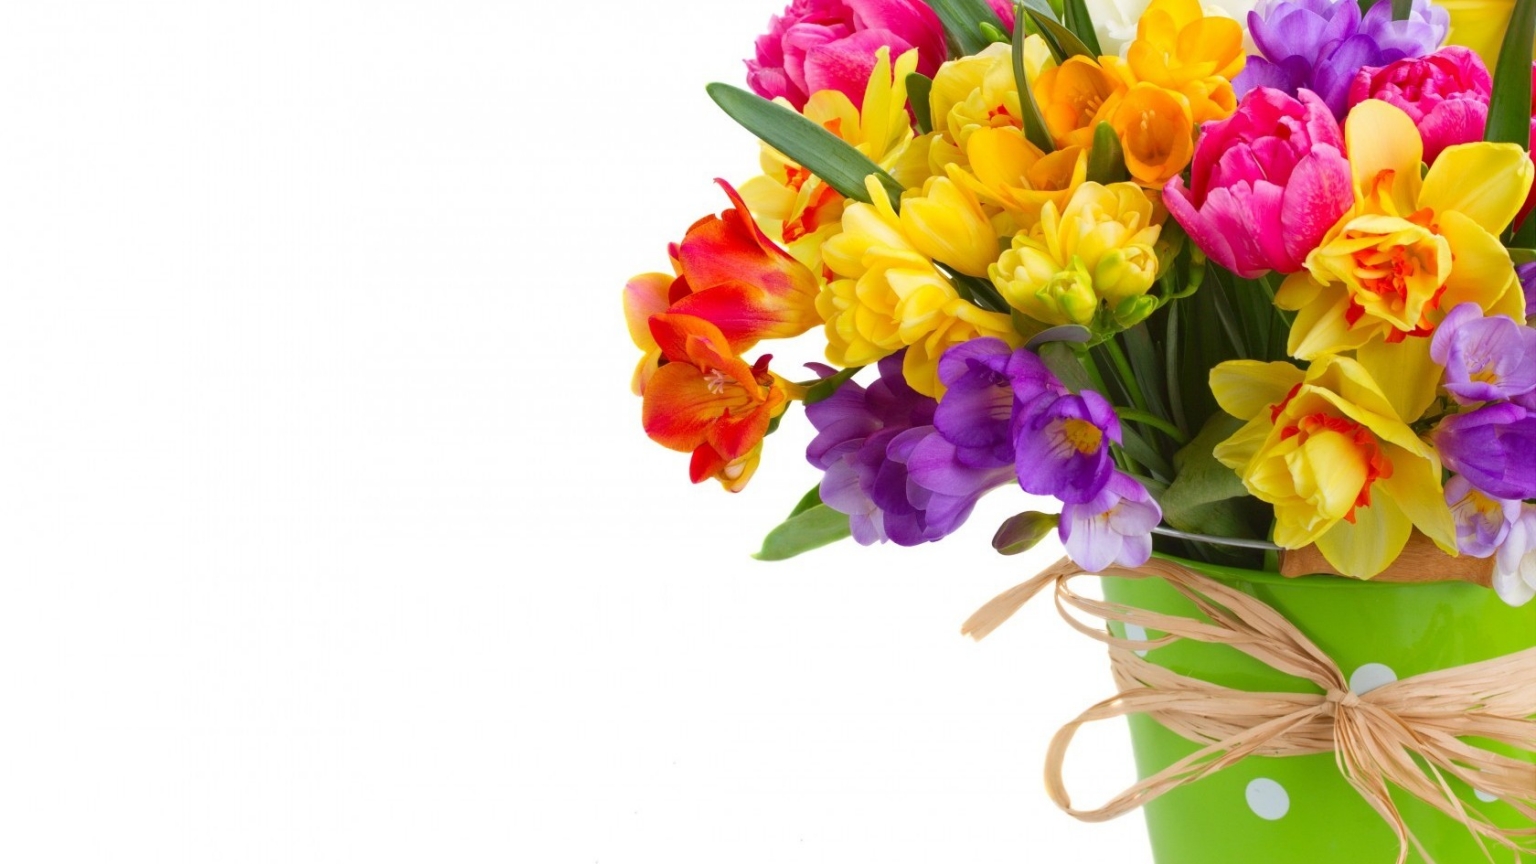 Daffodils and Freesias Bouquet for 1536 x 864 HDTV resolution